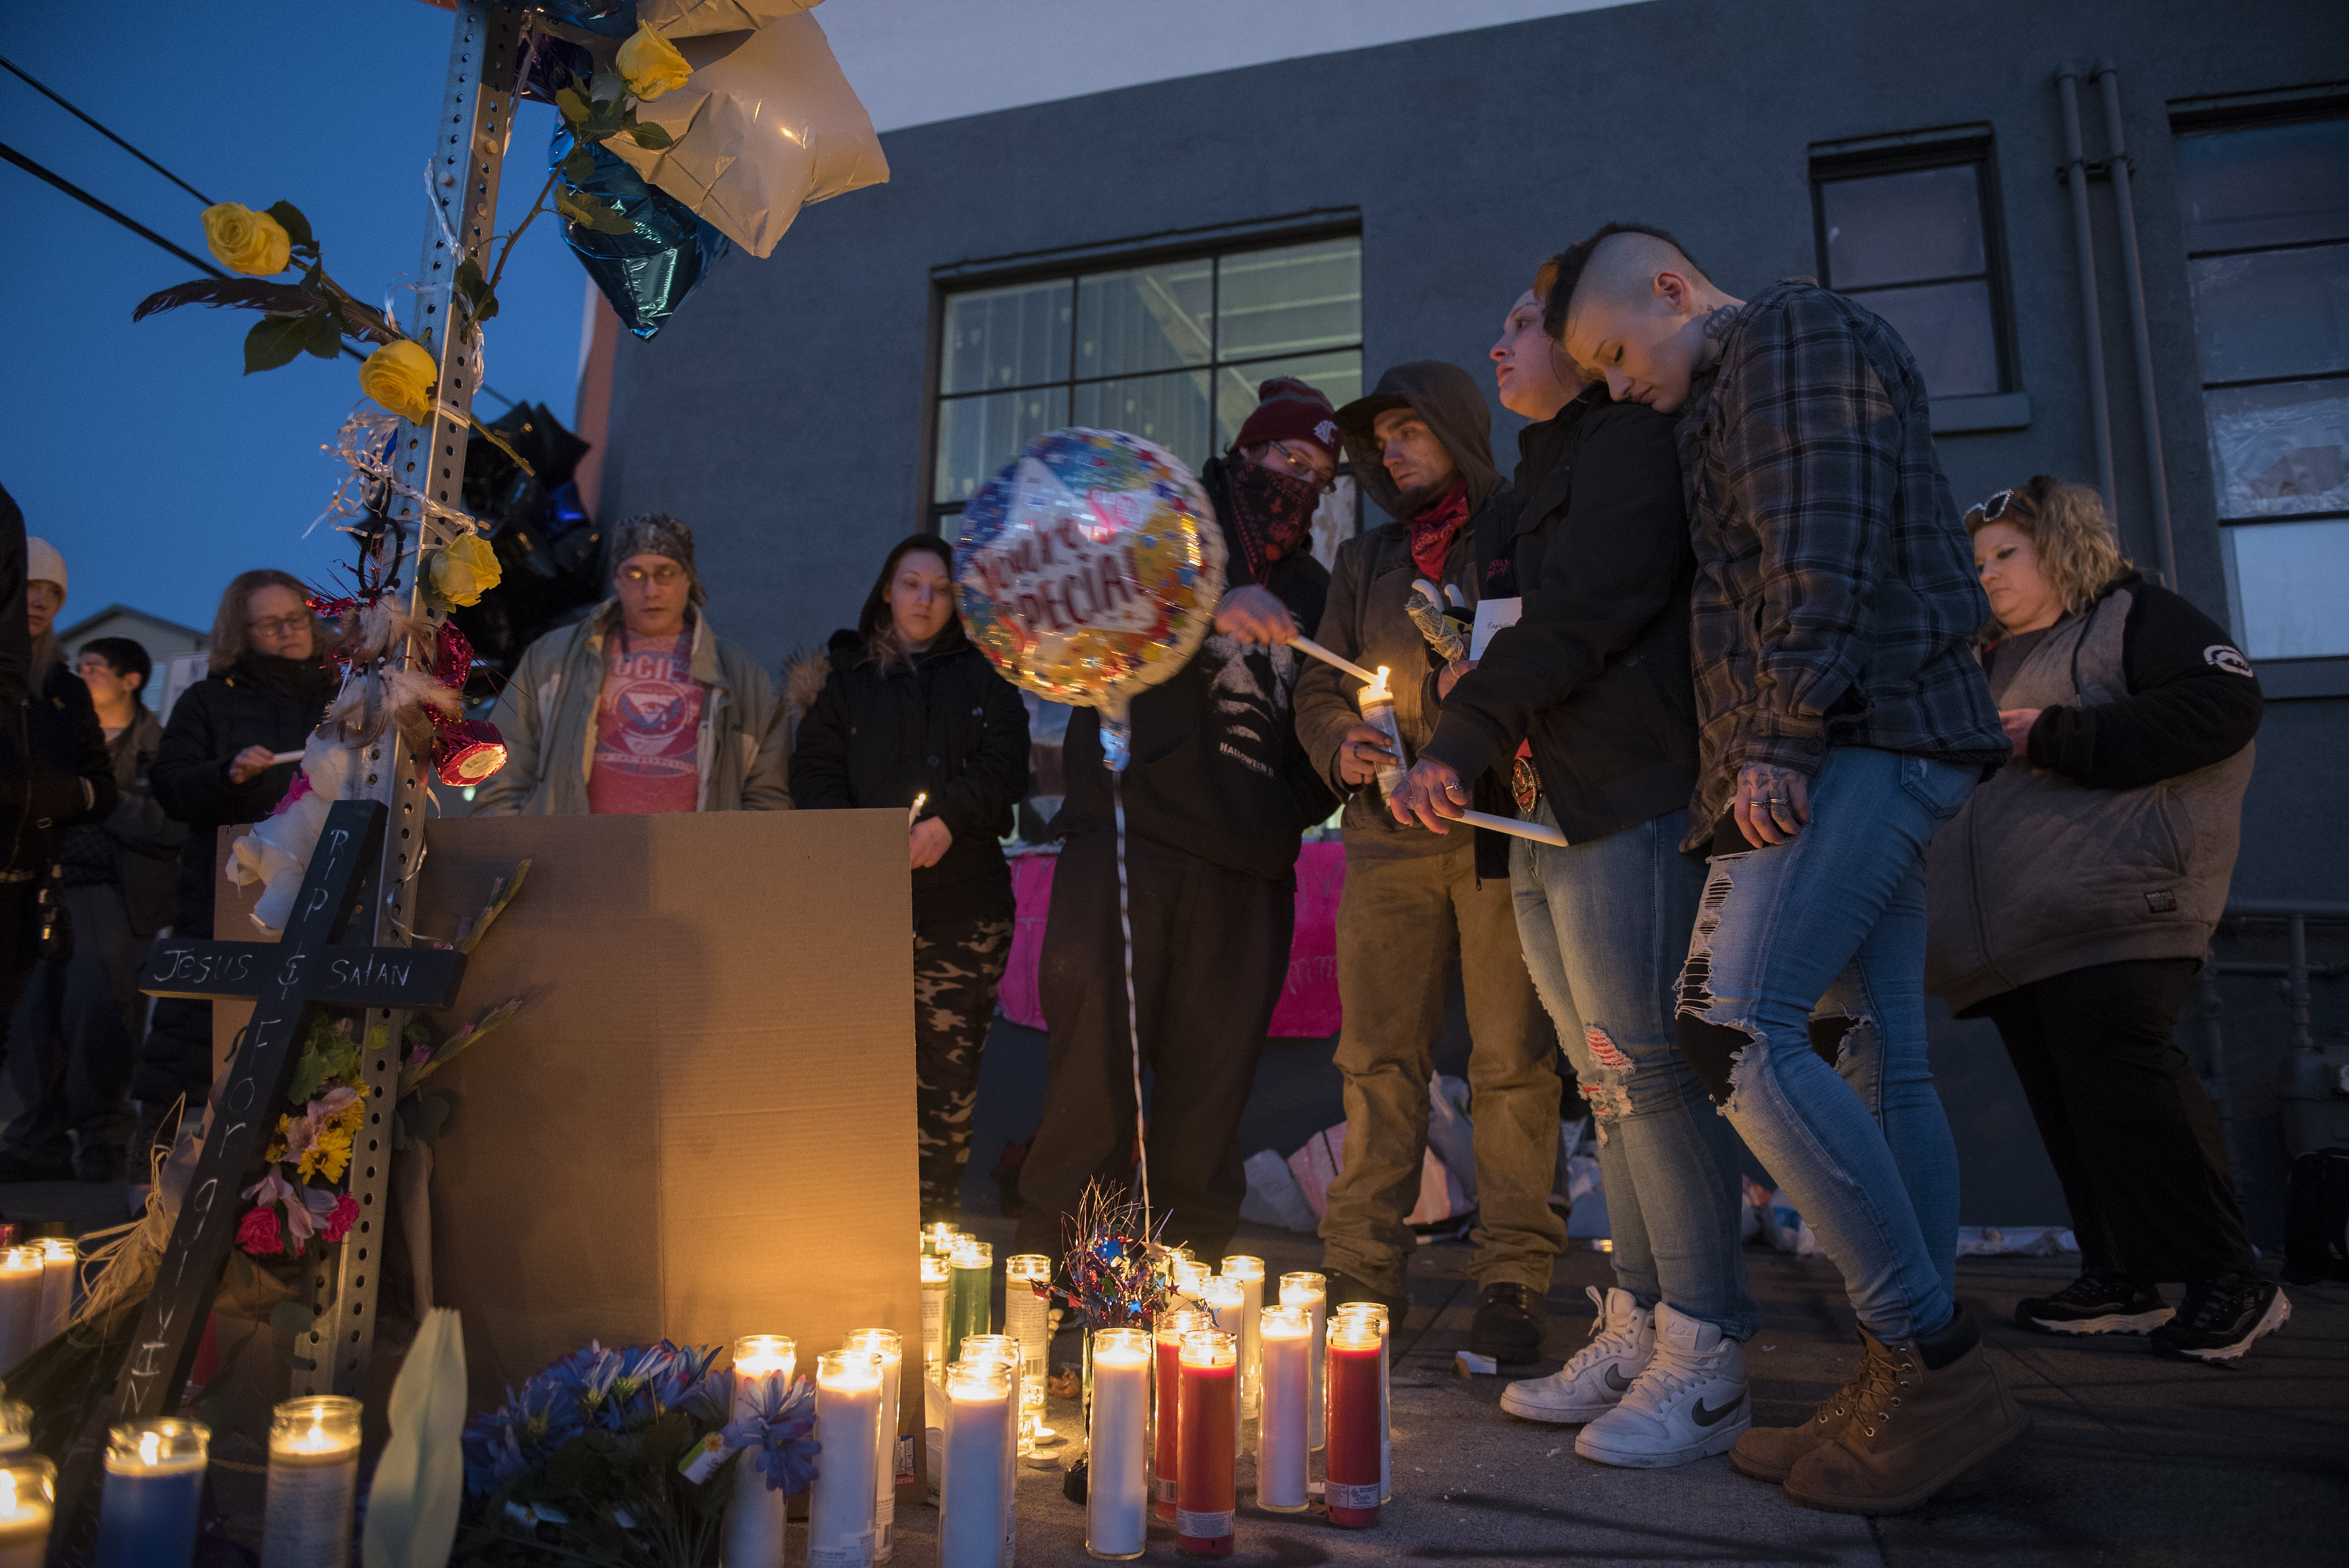 Friends and loved ones of Michael Pierce gather for an emotional candlelight vigil in his memory in downtown Vancouver on Friday evening, March 1, 2019.